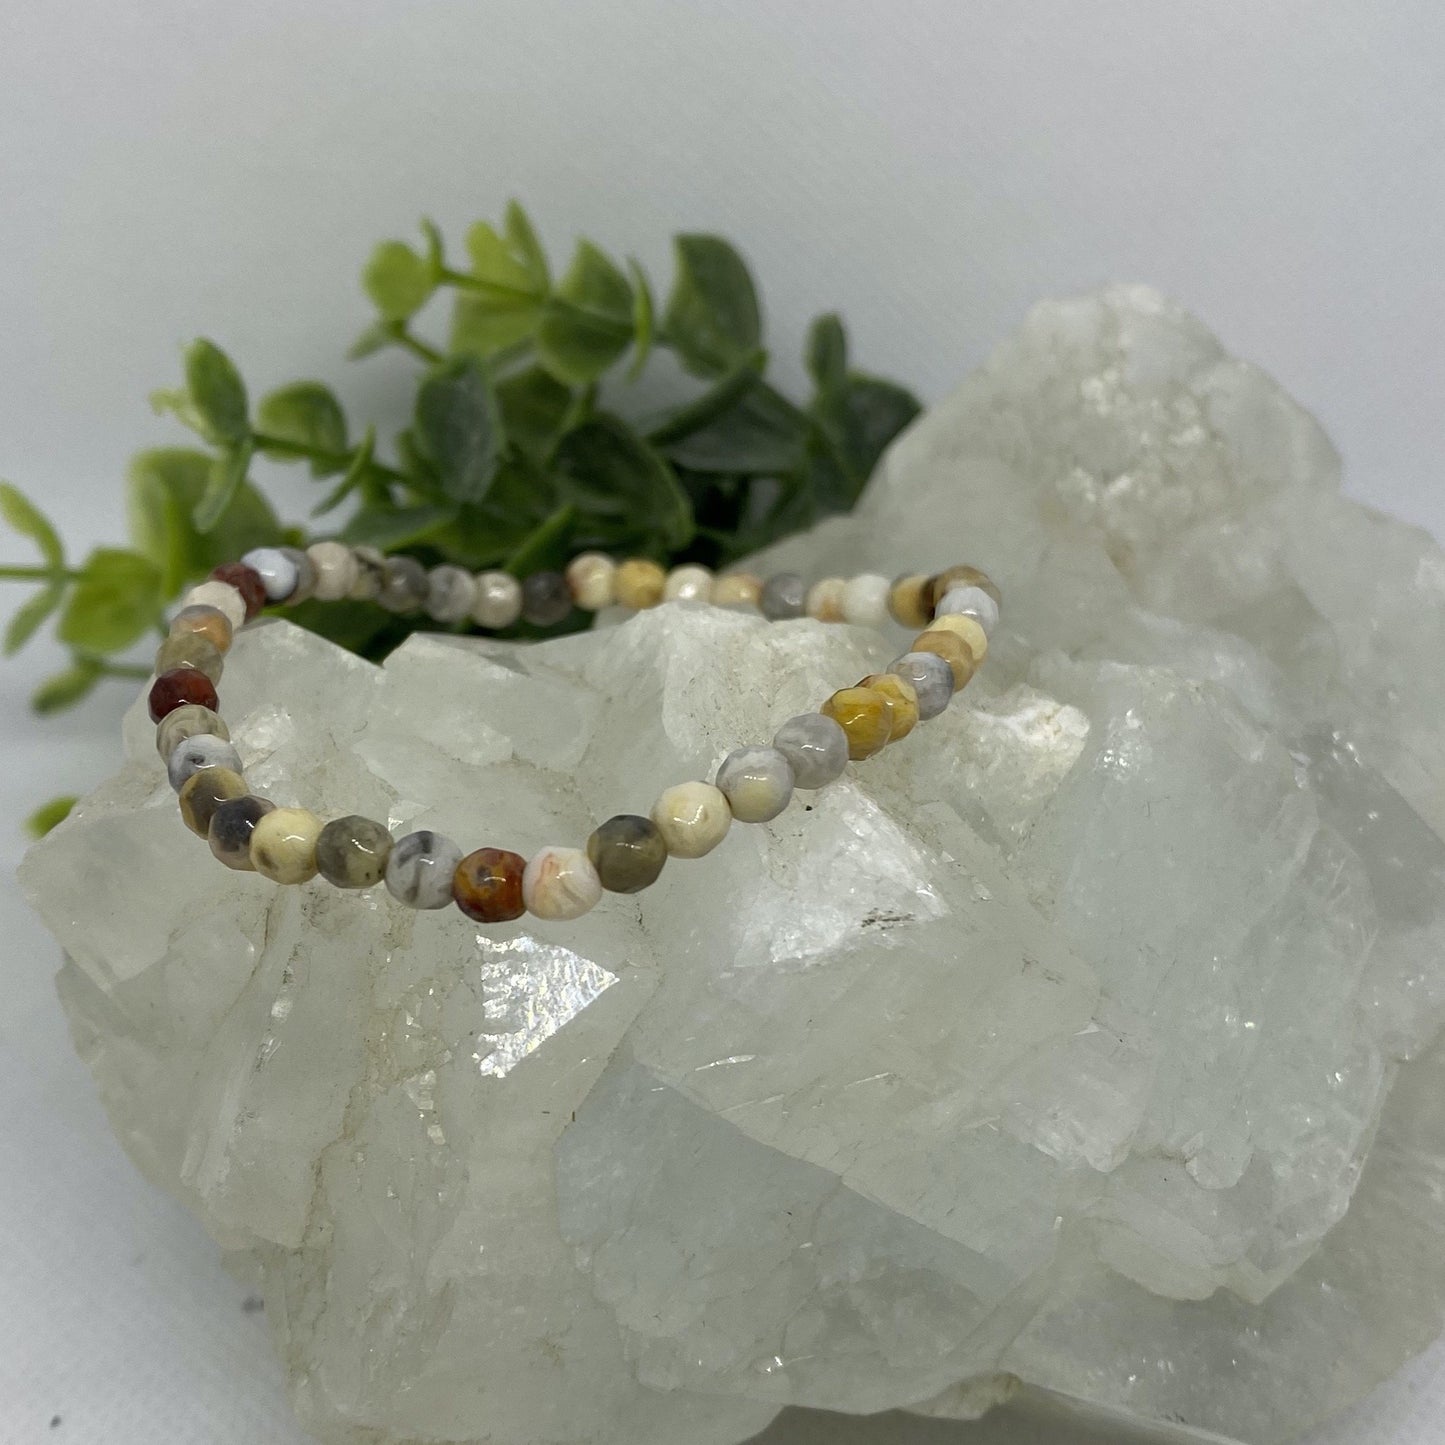 Positivity Stack: Crazy Lace Agate, Smoky Quartz, and Yellow Calcite